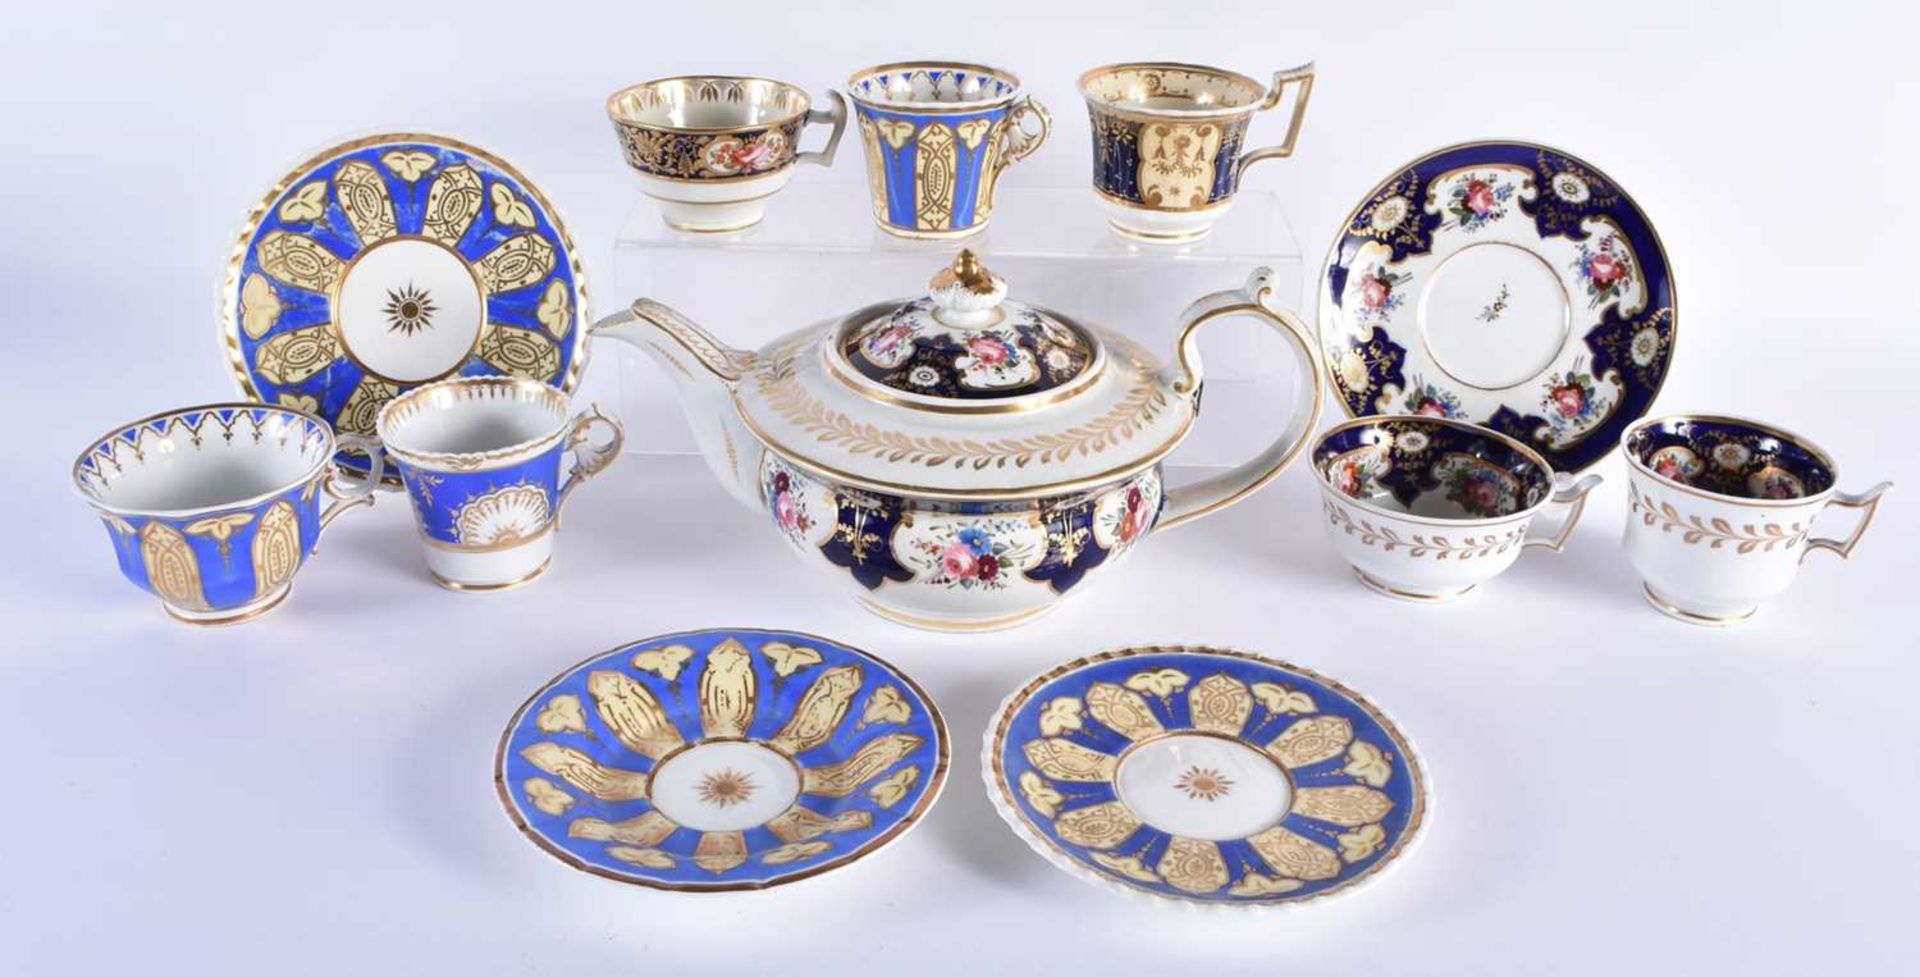 A COLLECTION OF EARLY 19TH CENTURY ENGLISH PORCELAIN TEAWARES in various forms and sizes. Largest 14